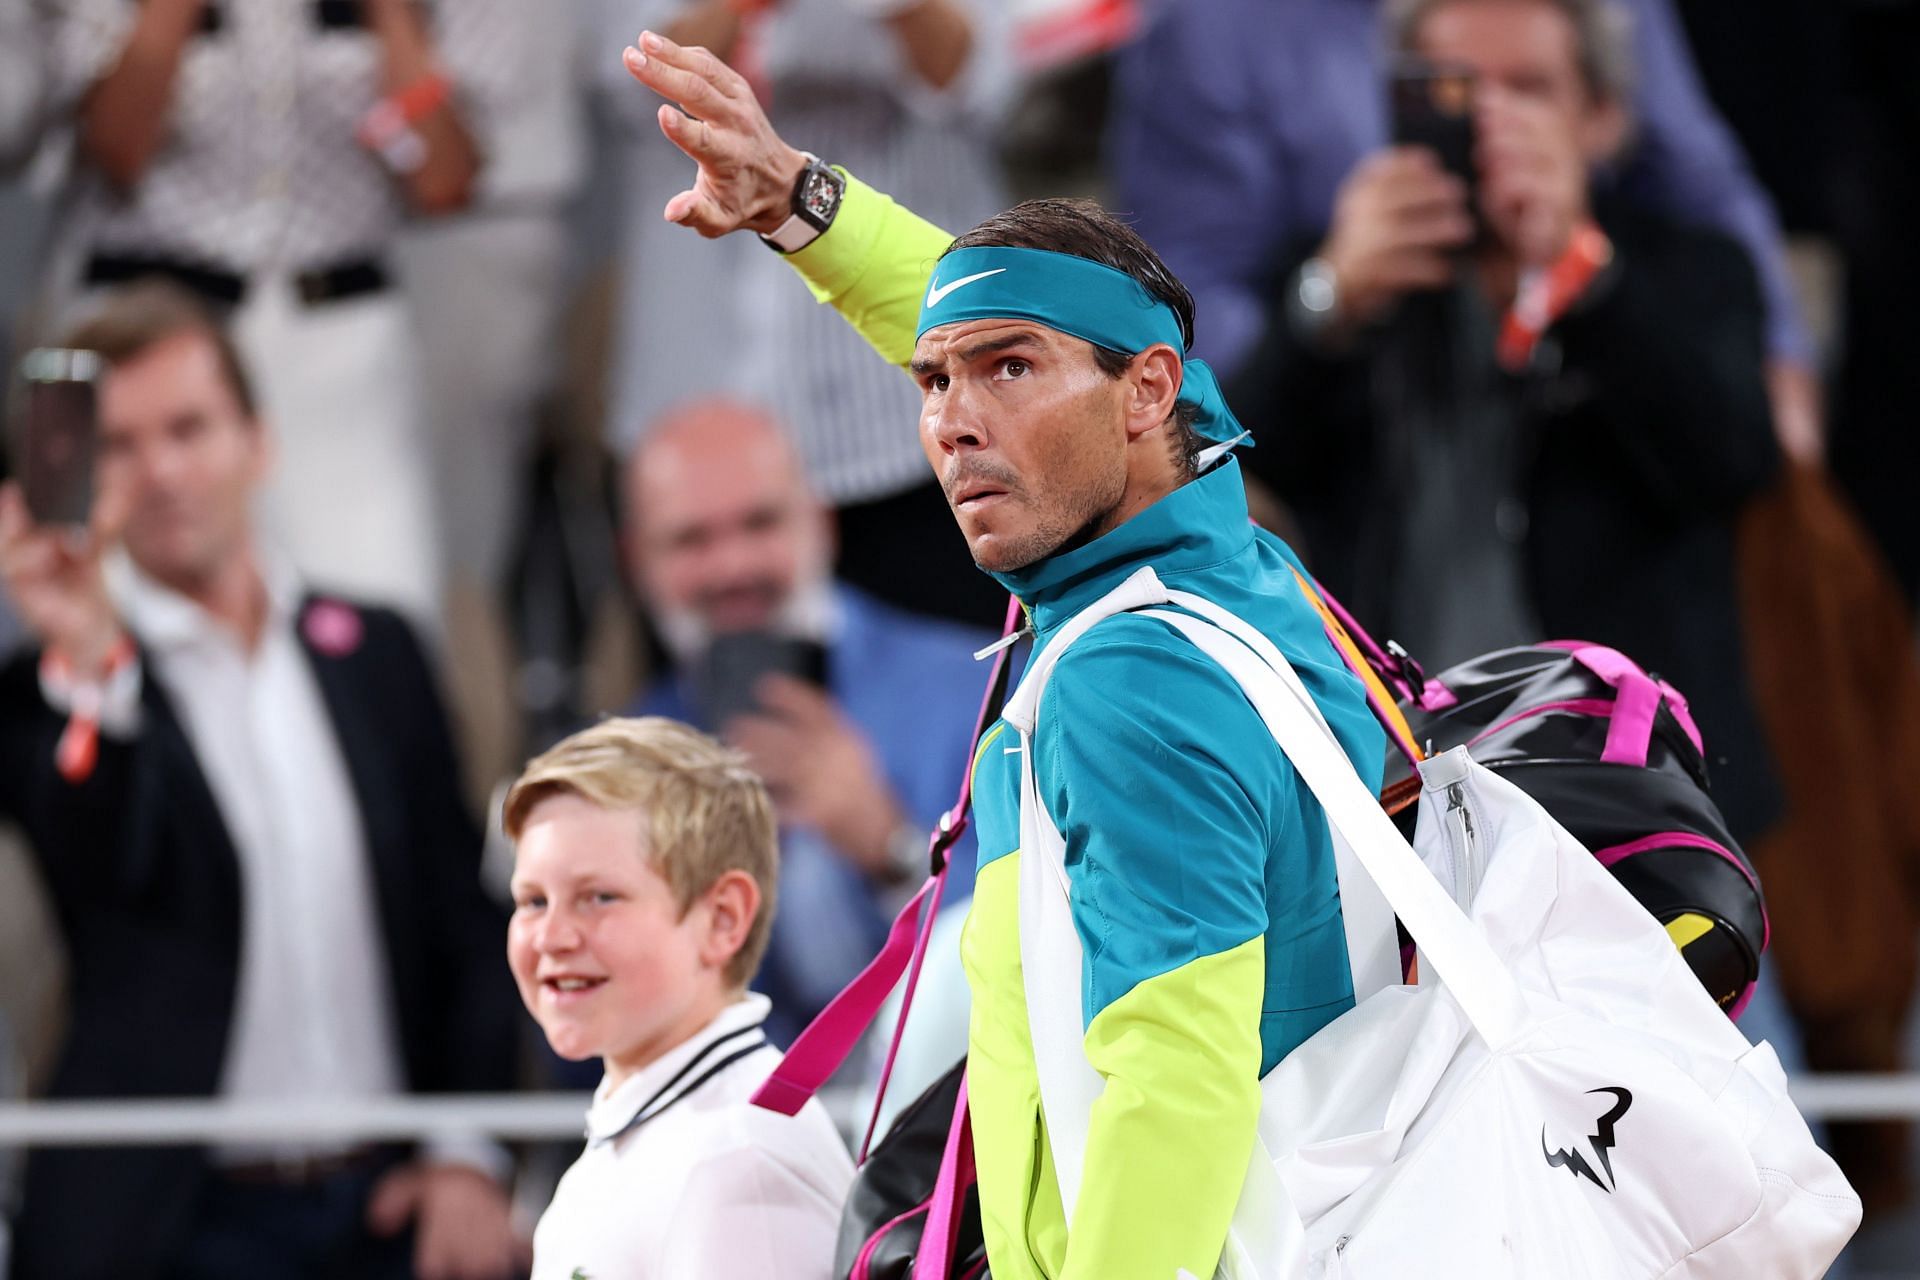 Rafael Nadal is currently ranked World No. 2.